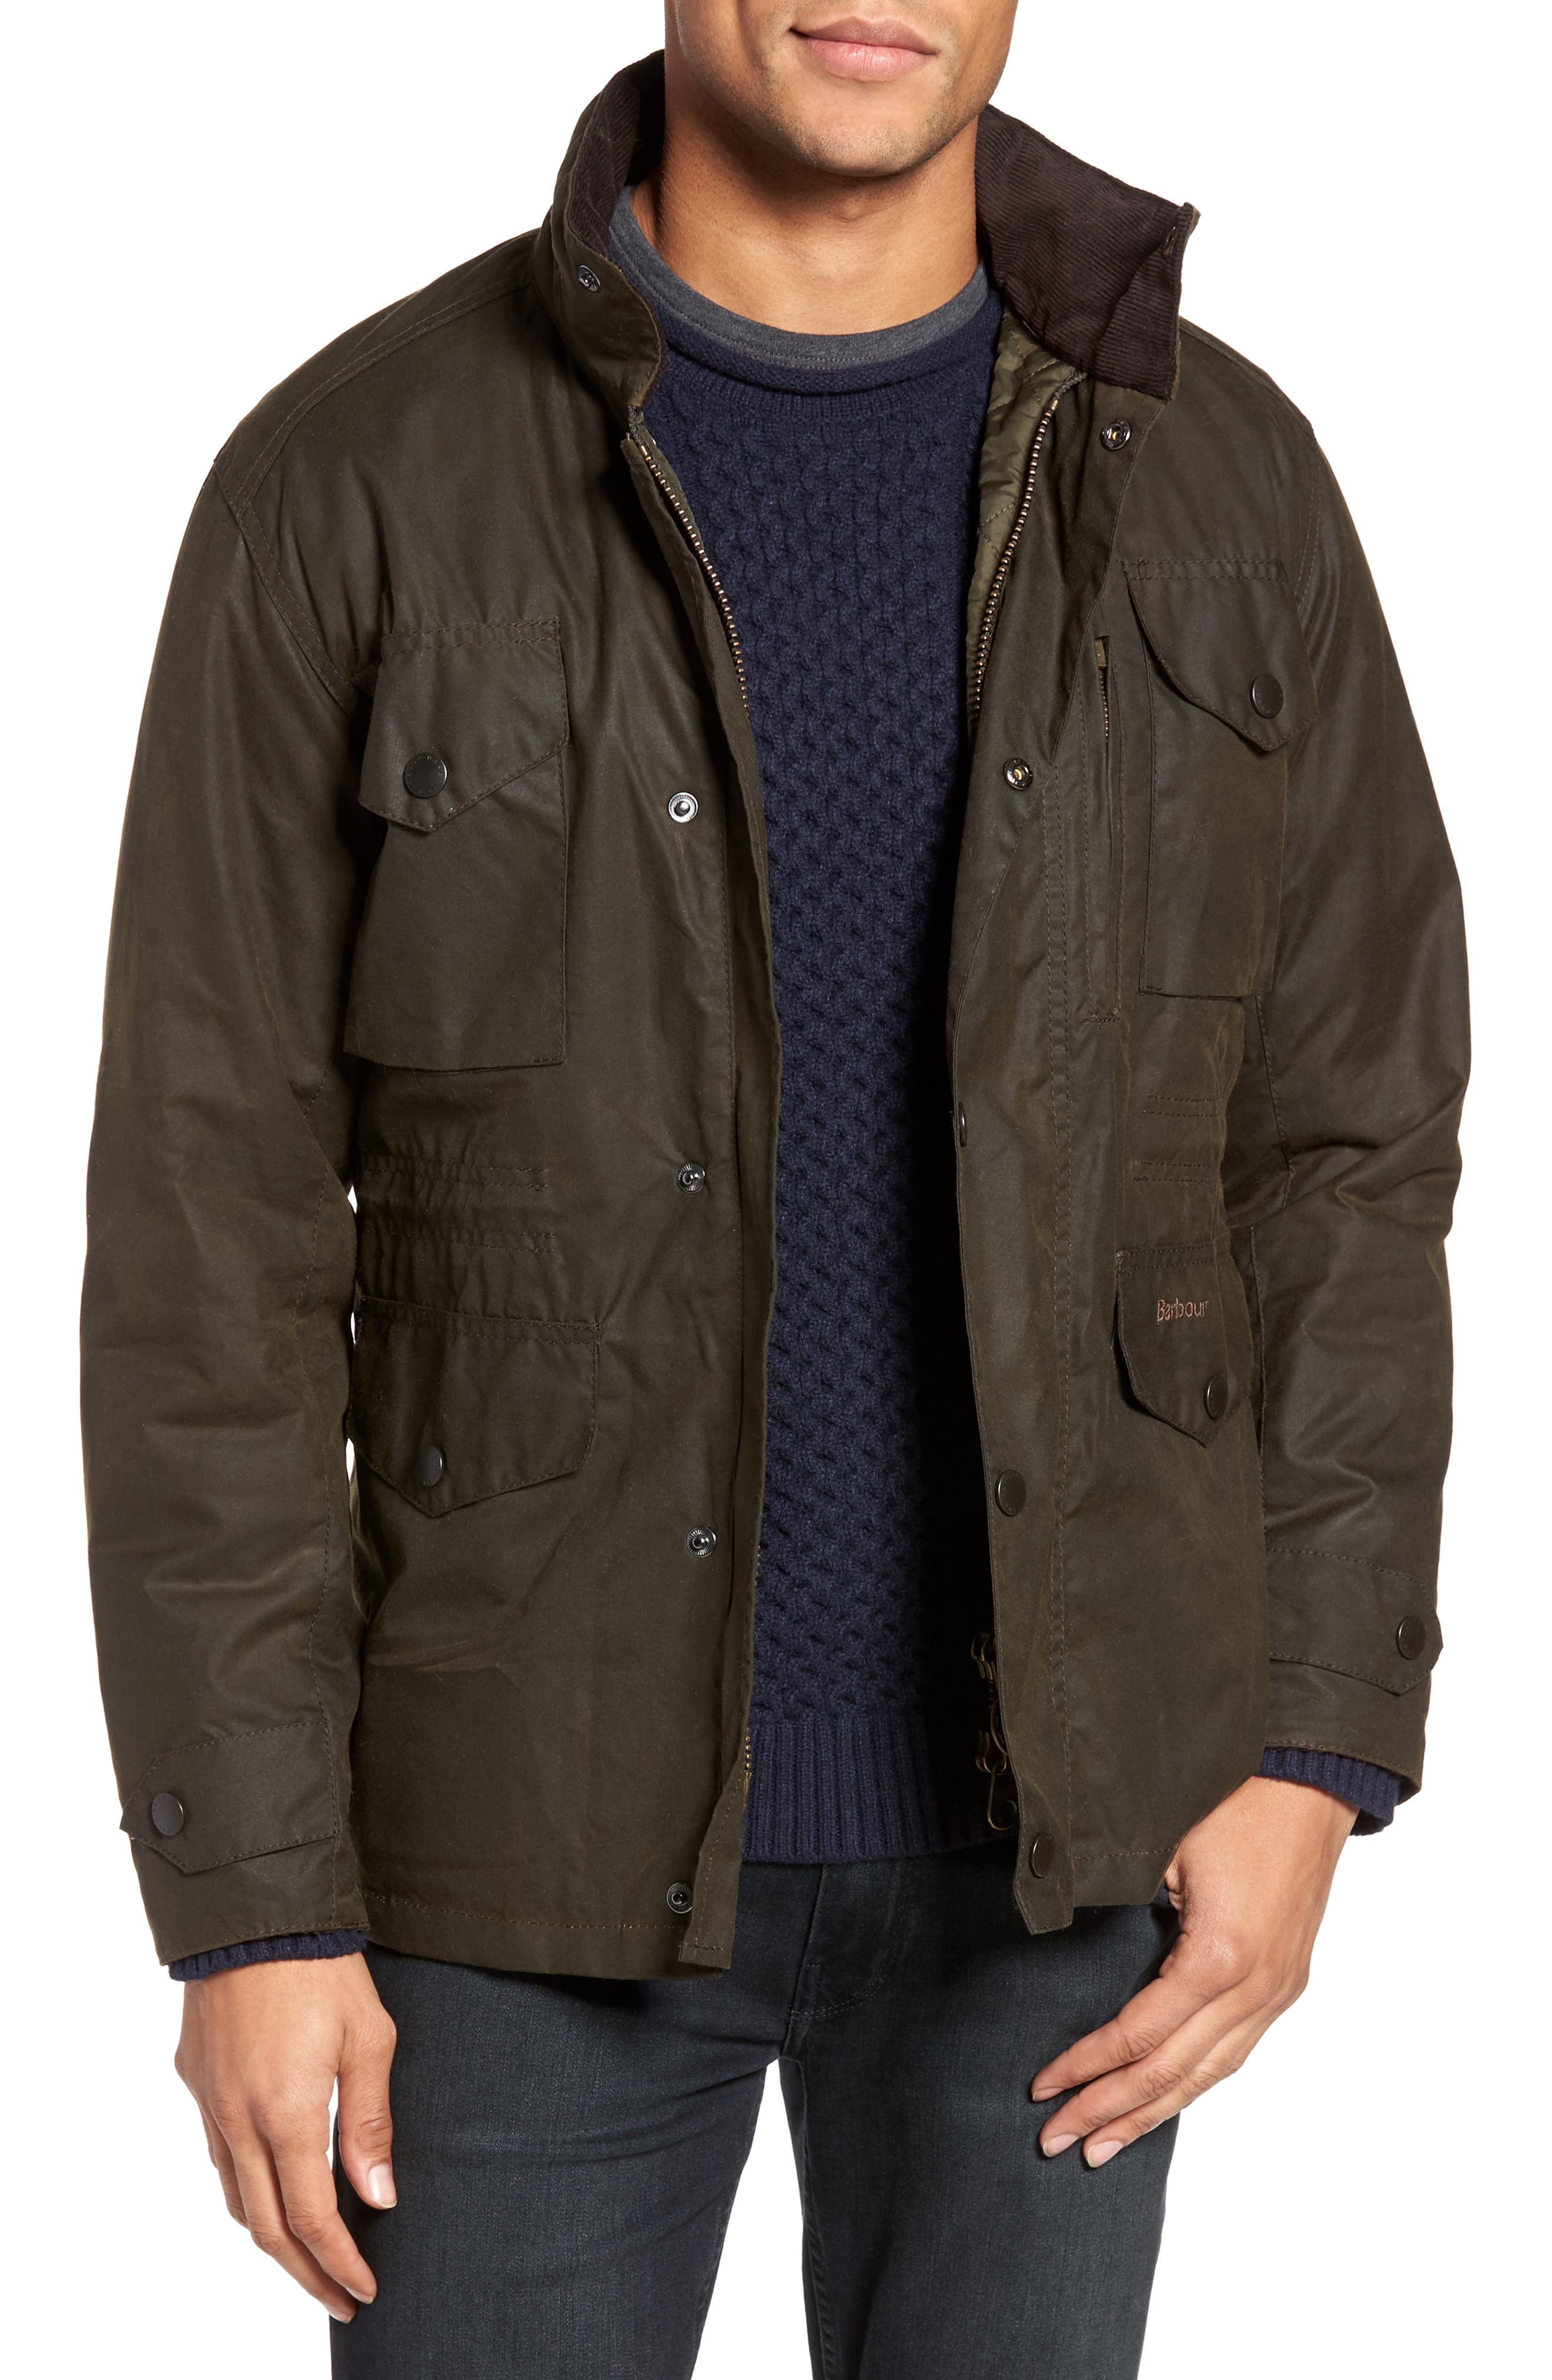 barbour women's highgate quilted jacket